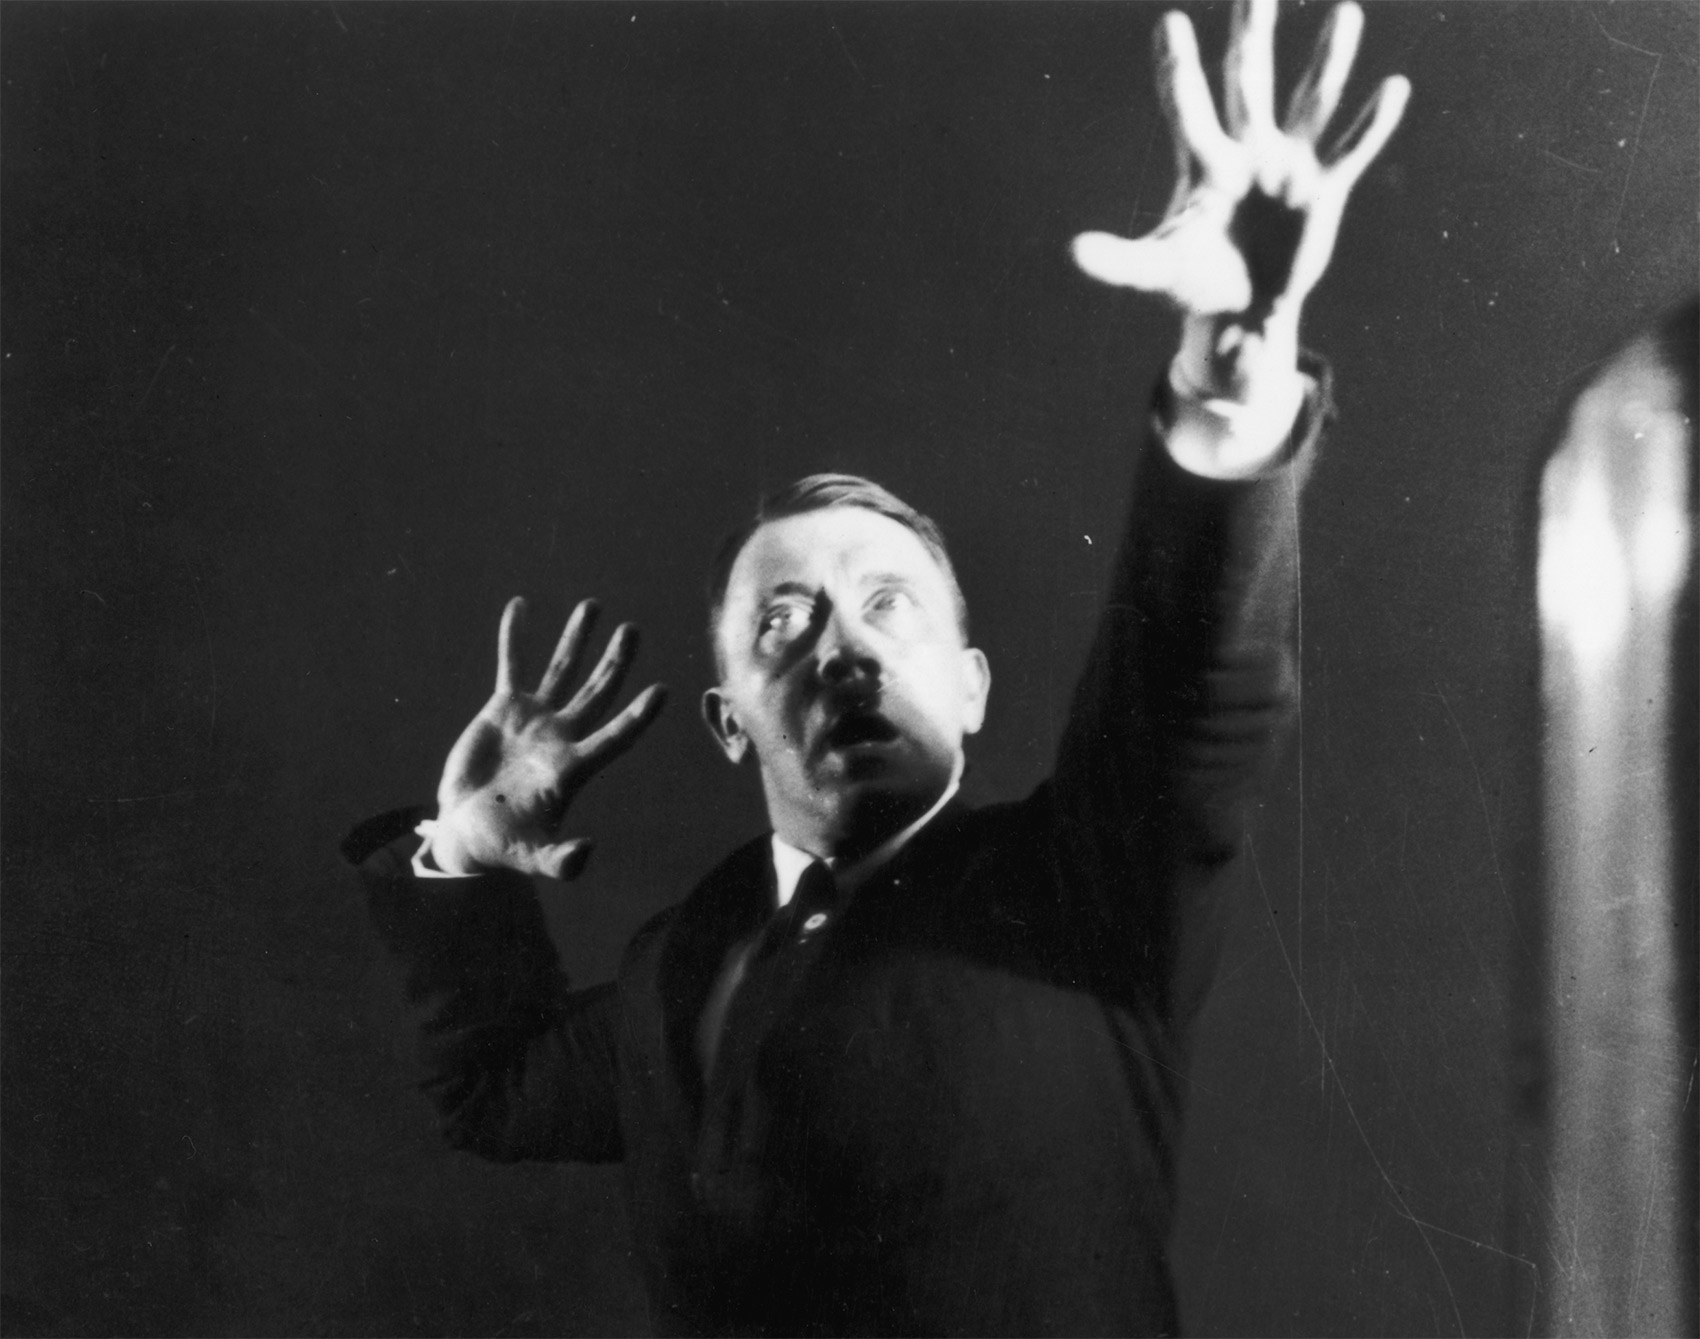 Hitler miming gestures to a record of his speeches; part of a series of photographs he commissioned in 1925 to aid self-analysis and improve his hold over an audience.